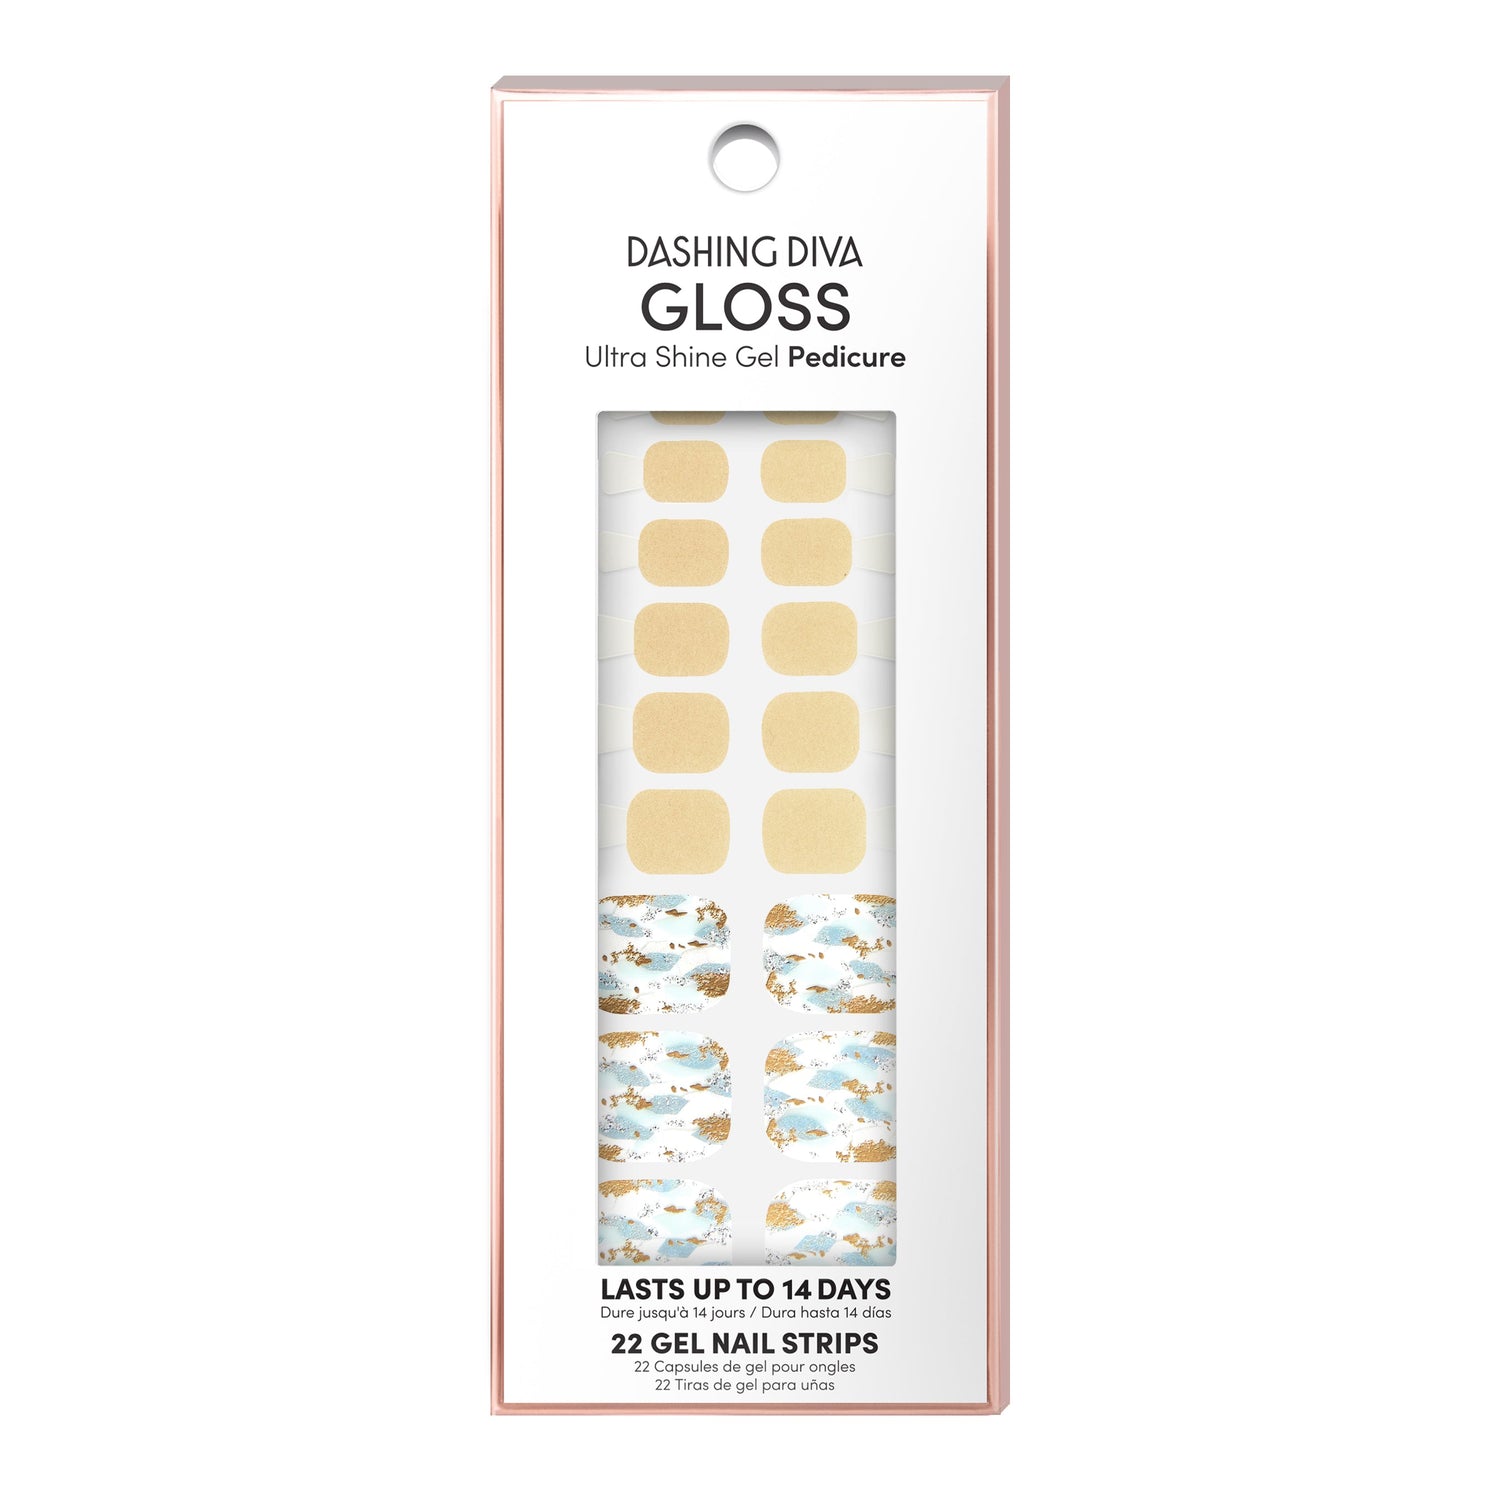 Dashing Diva GLOSS Pedicure gold glitter gel pedi strips with shattered glass accents.